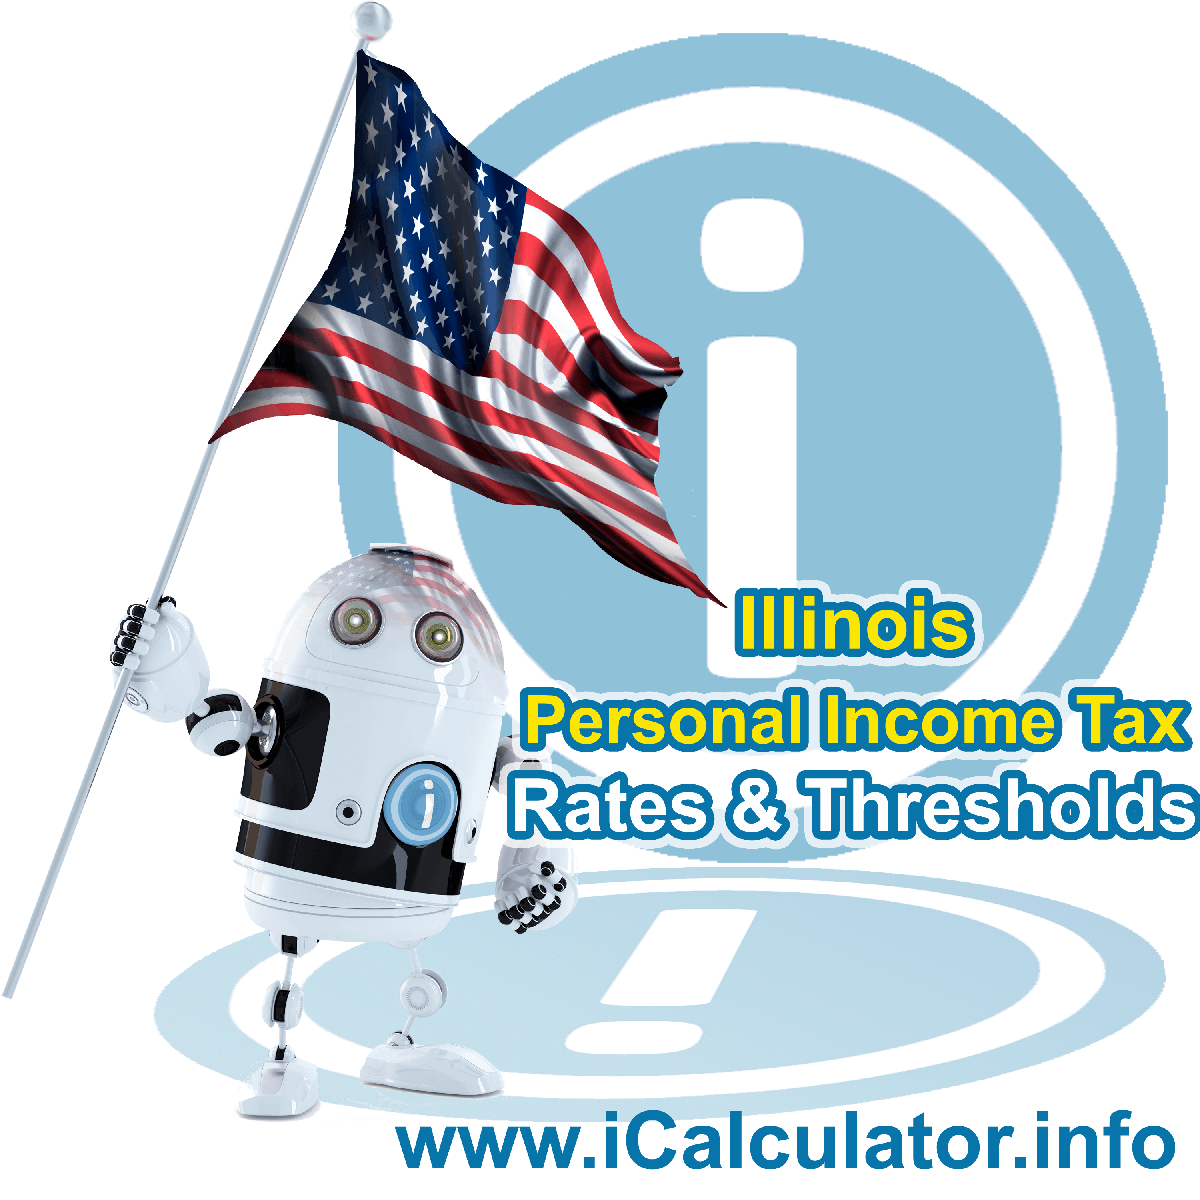 Illinois State Tax Tables 2014. This image displays details of the Illinois State Tax Tables for the 2014 tax return year which is provided in support of the 2014 US Tax Calculator